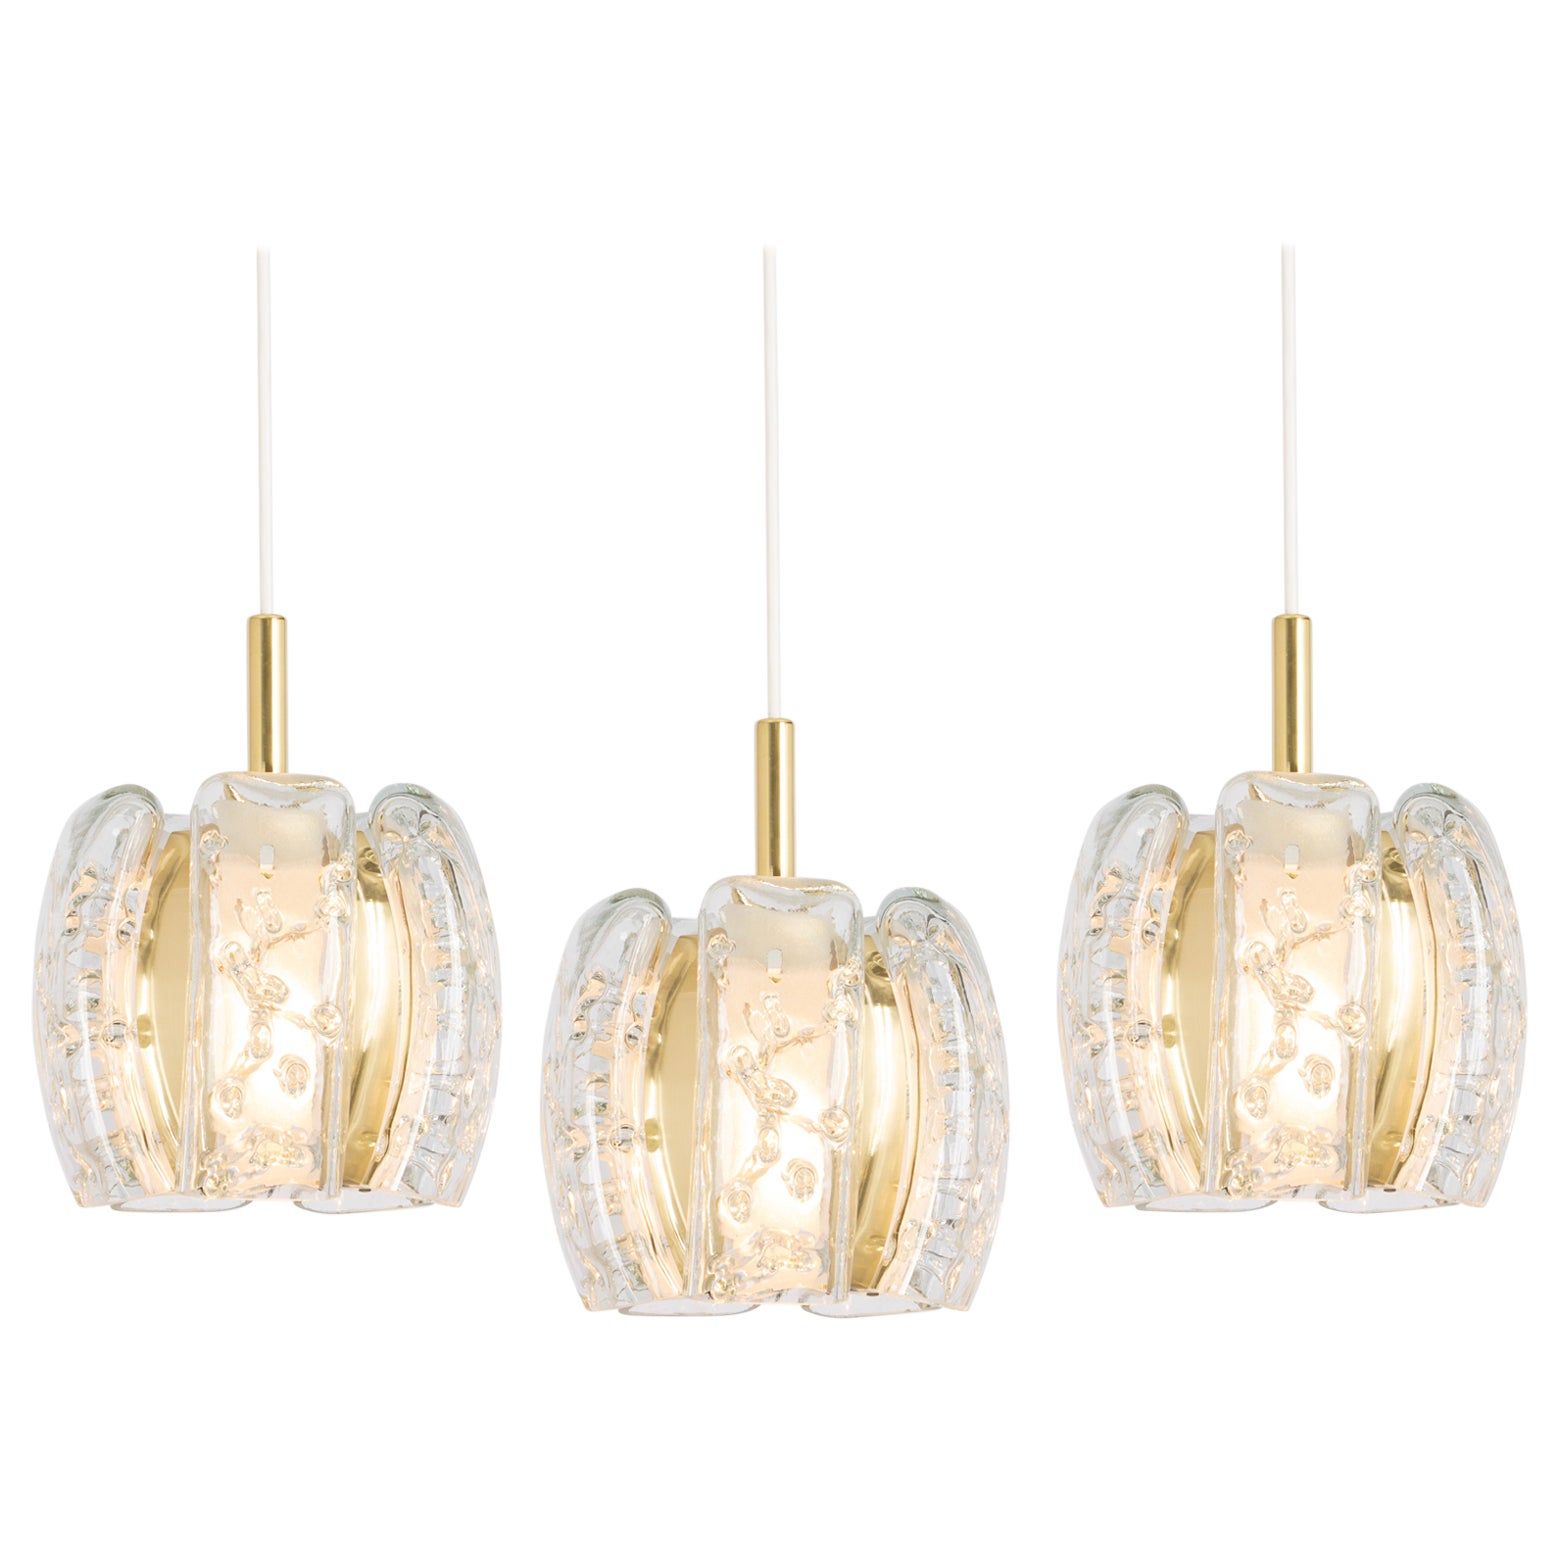 1 of 6 Petite Murano Tubes Pendant Lights by Doria, 1970s For Sale